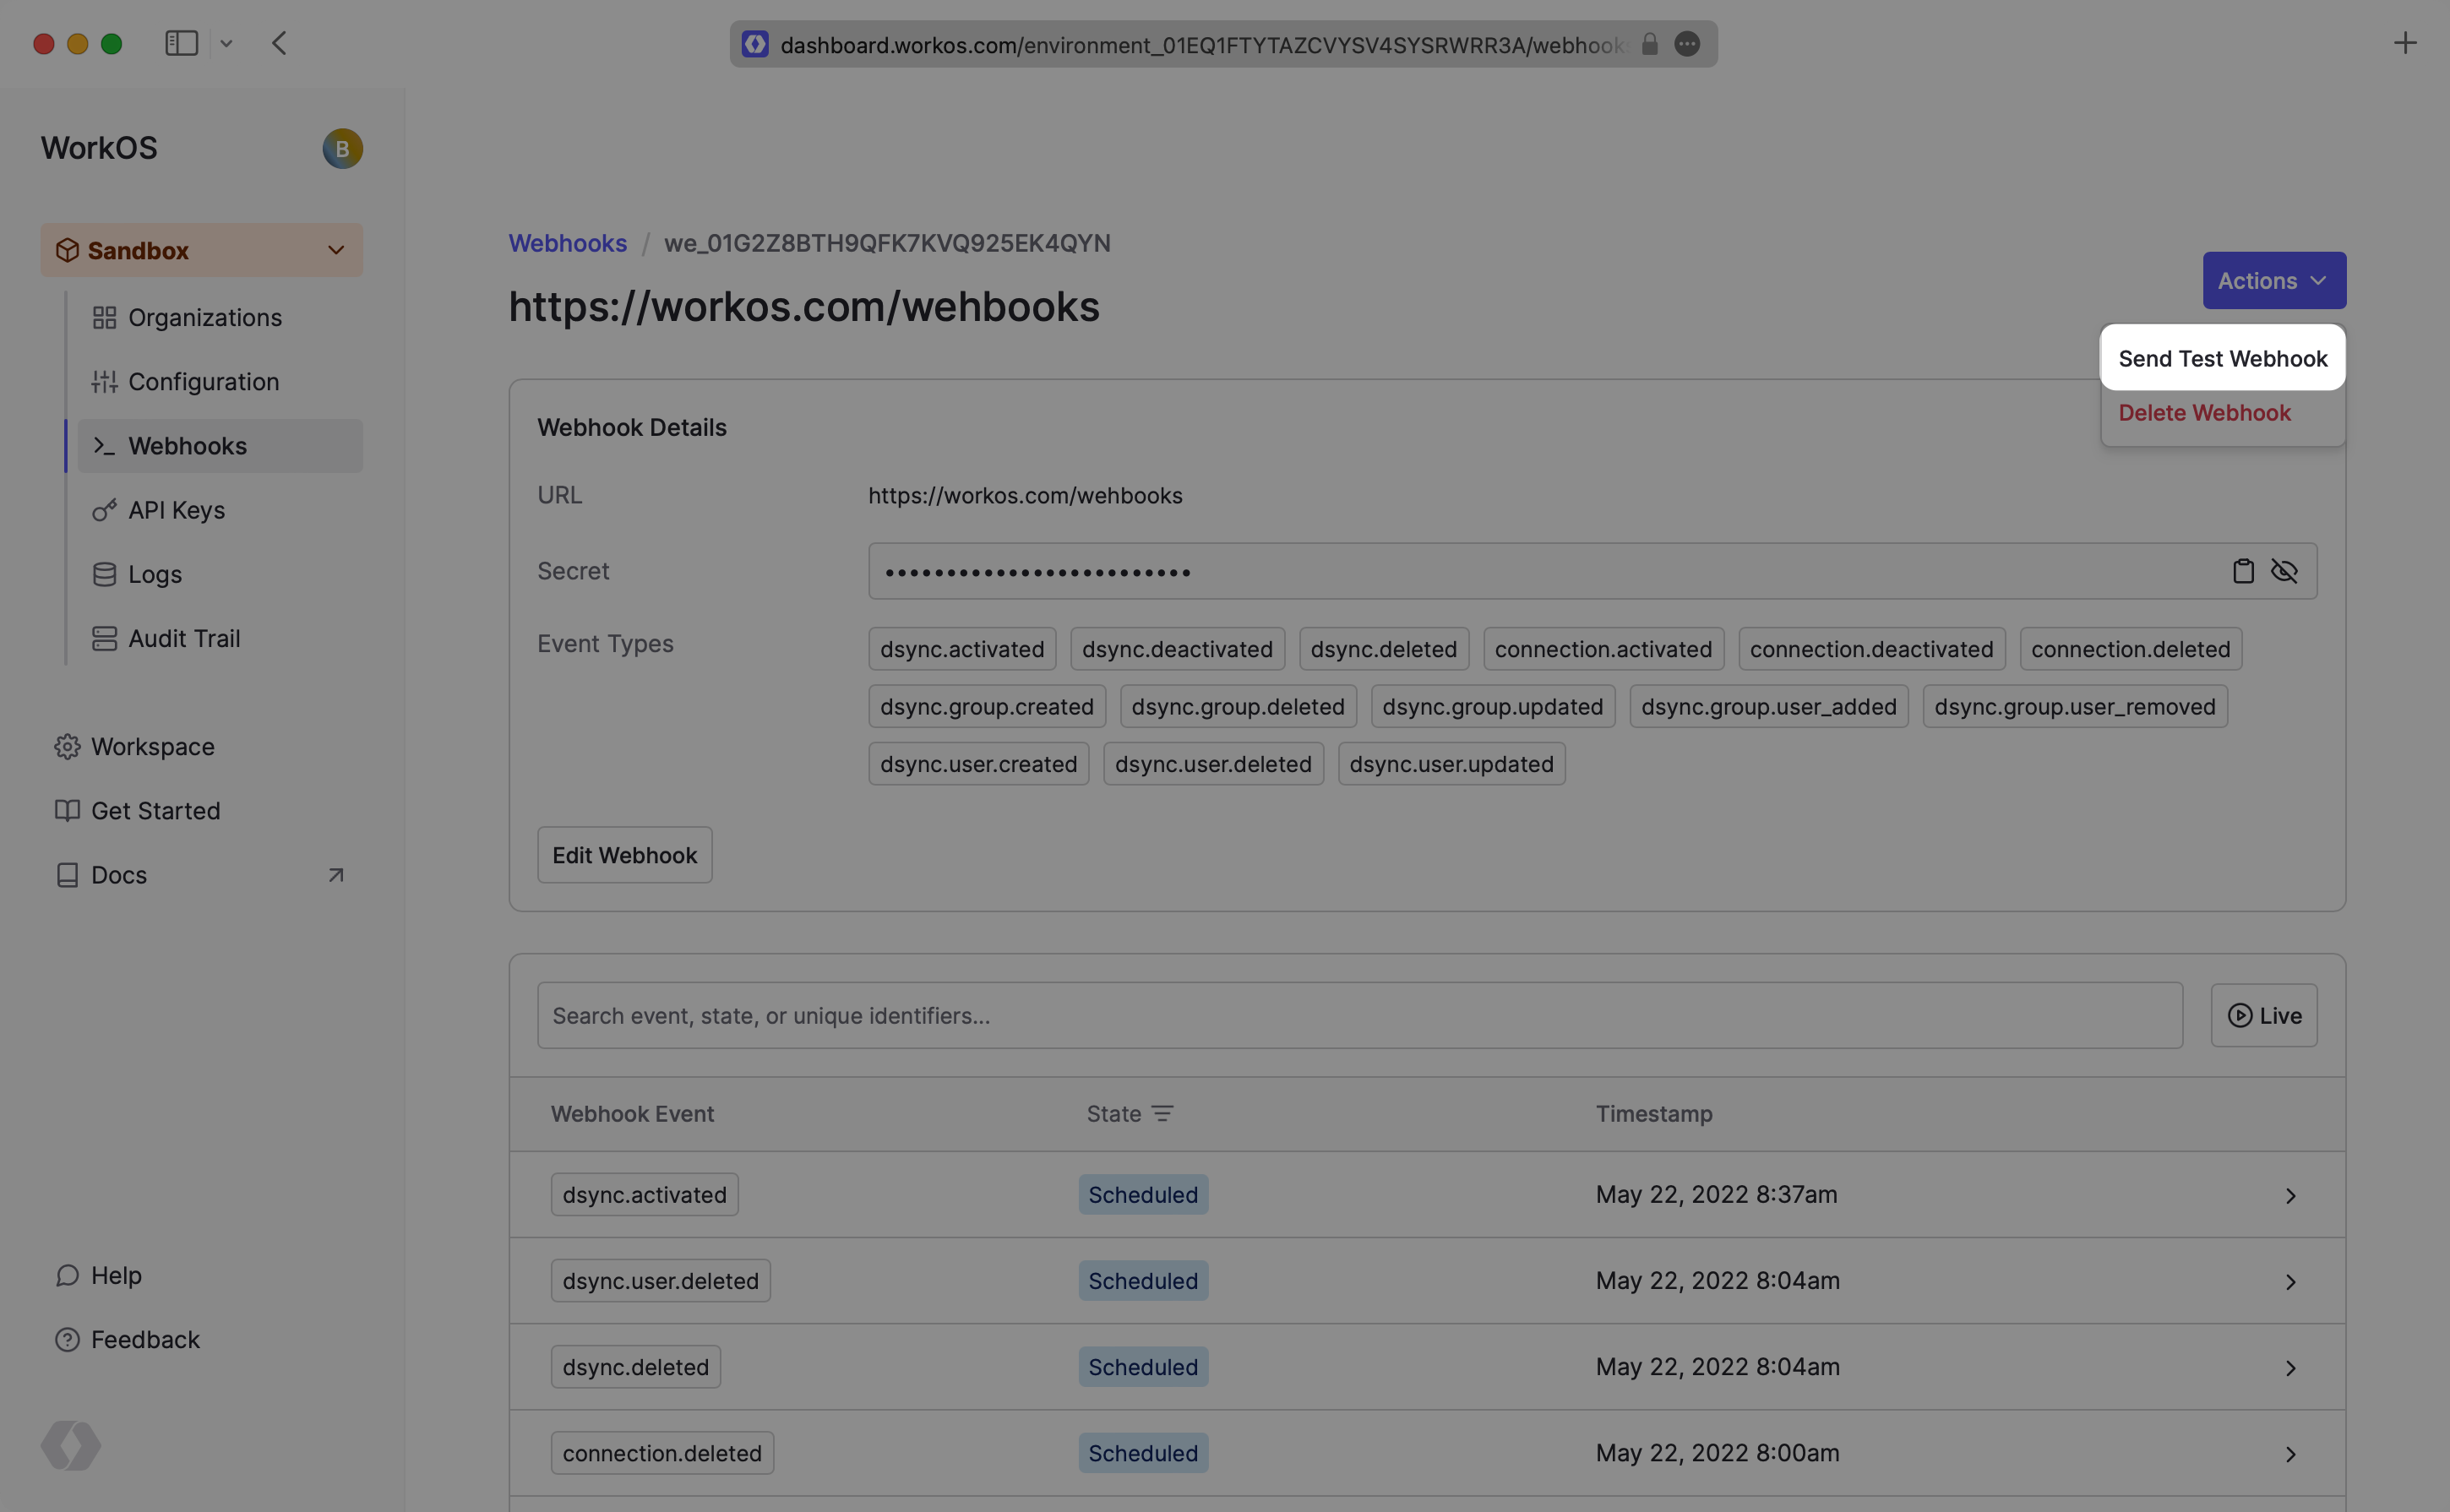 A screenshot showing how to send a test webhook in the WorkOS dashboard.